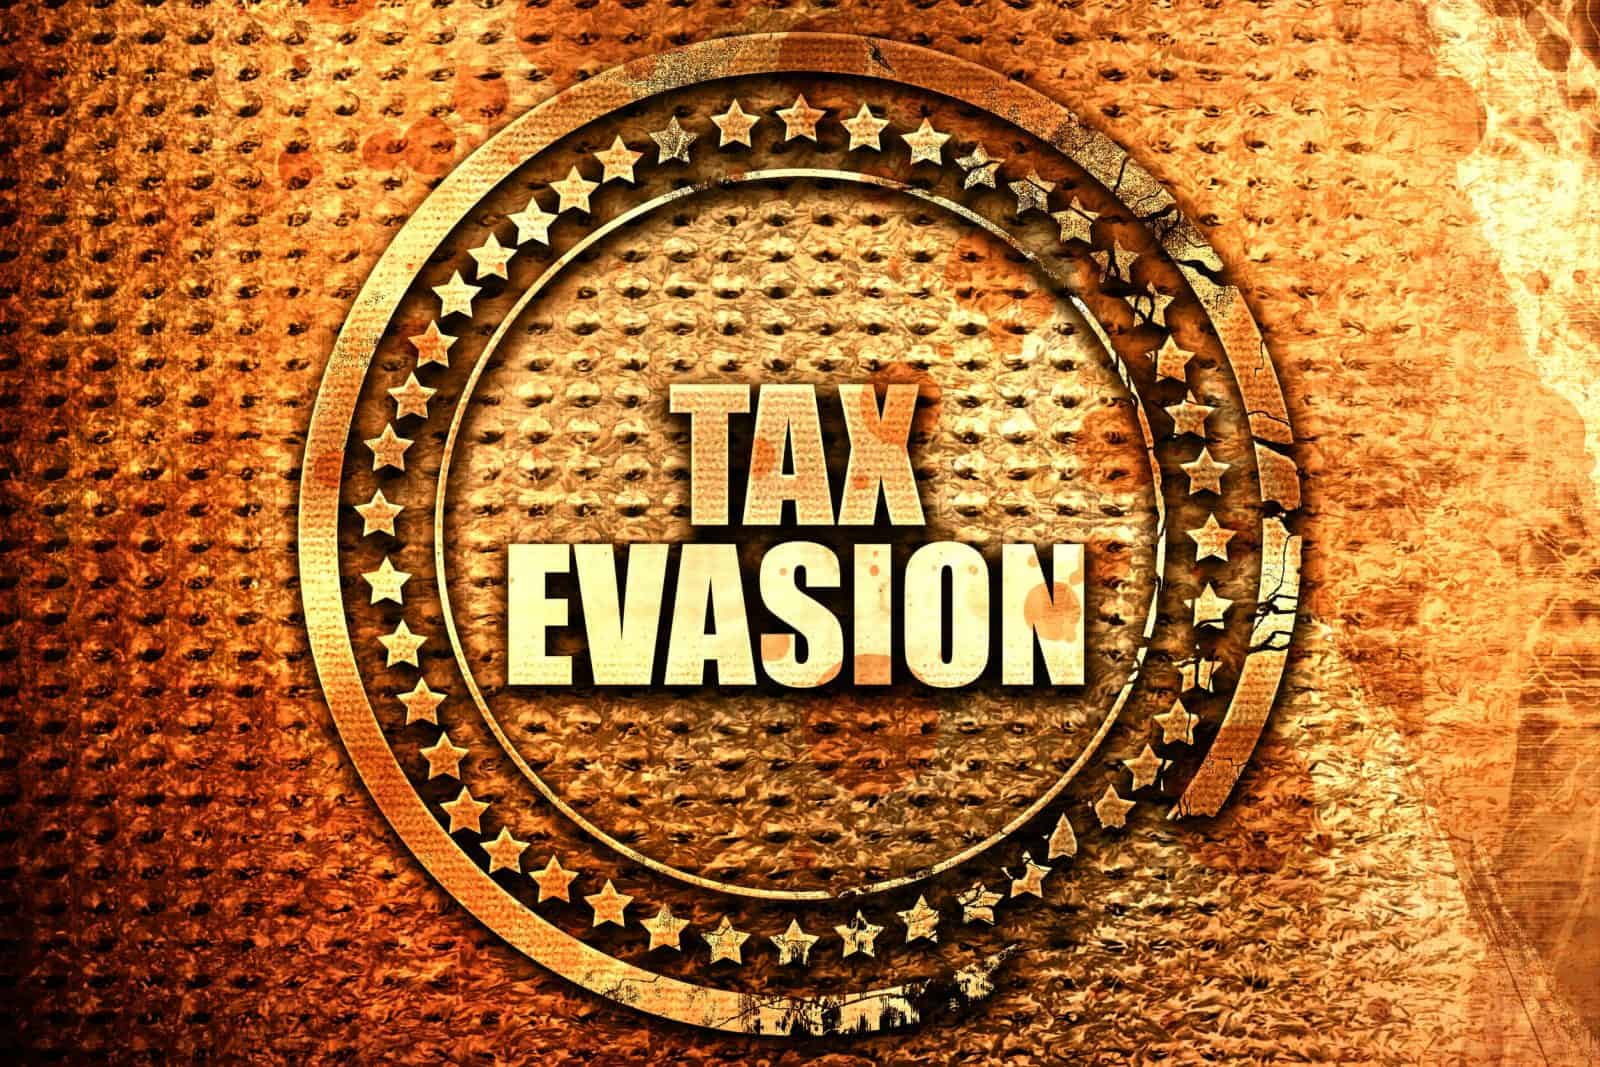 Miami CPA Charged with Tax Evasion After Failing to File and Pay Taxes for Multiple Years